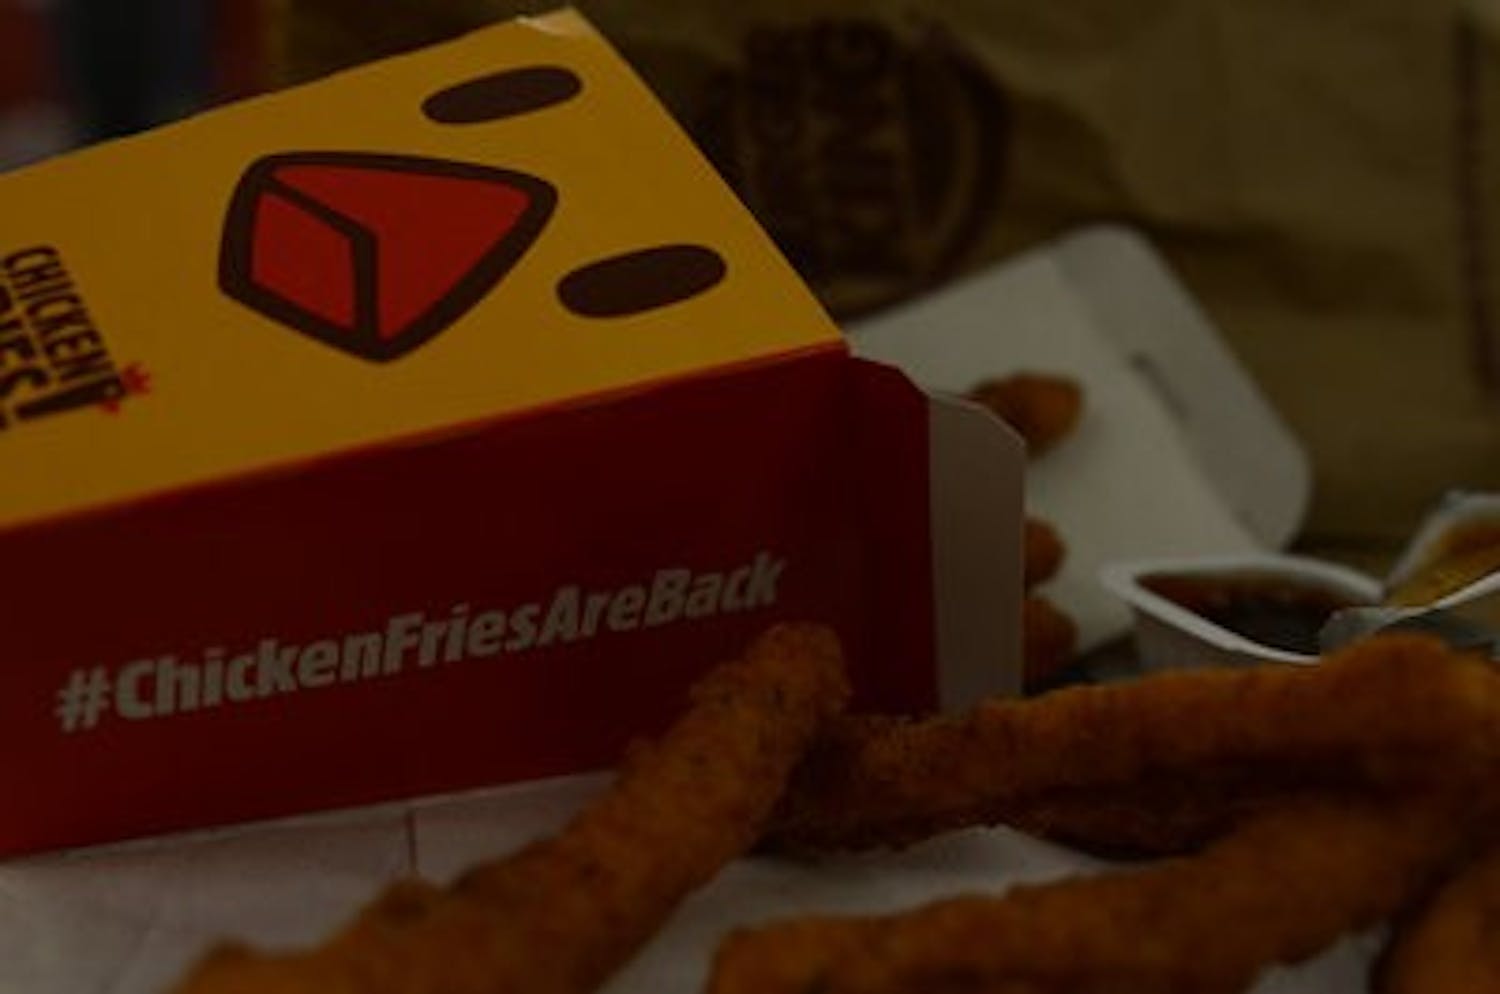 Burger King encourages customers to tweet about chicken fries using #ChickenFriesAreBack. (Raye May | Photo Editor)